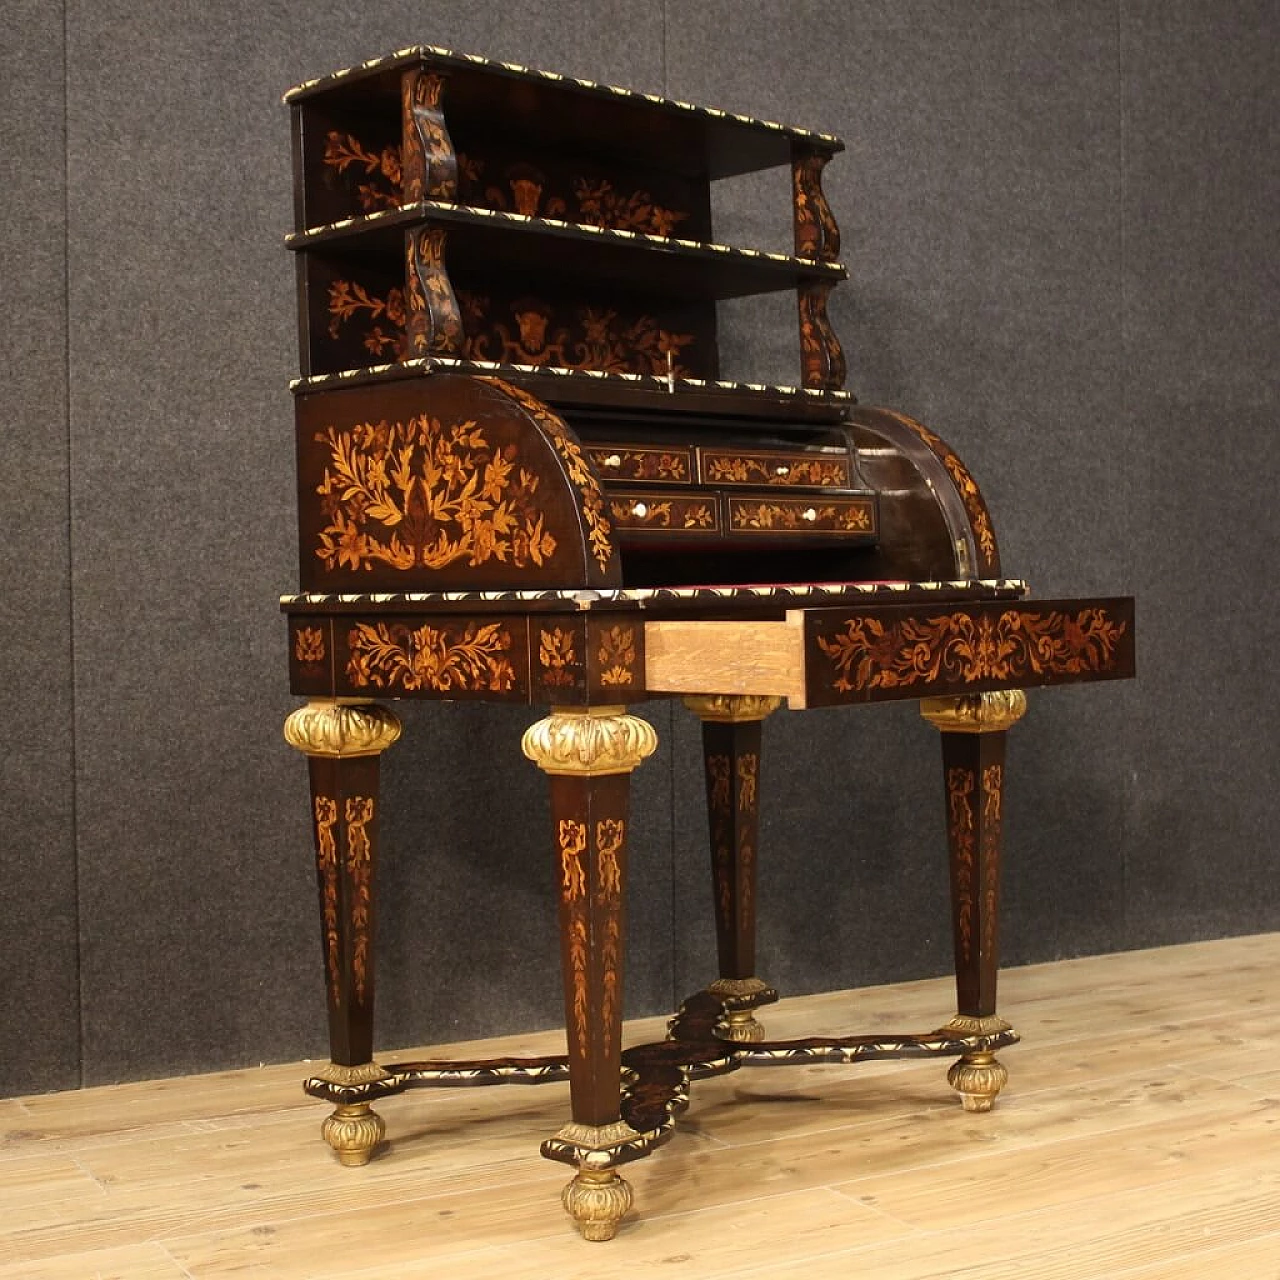 Inlaid French writing desk in Napoleon III style, early 20th century 1304417